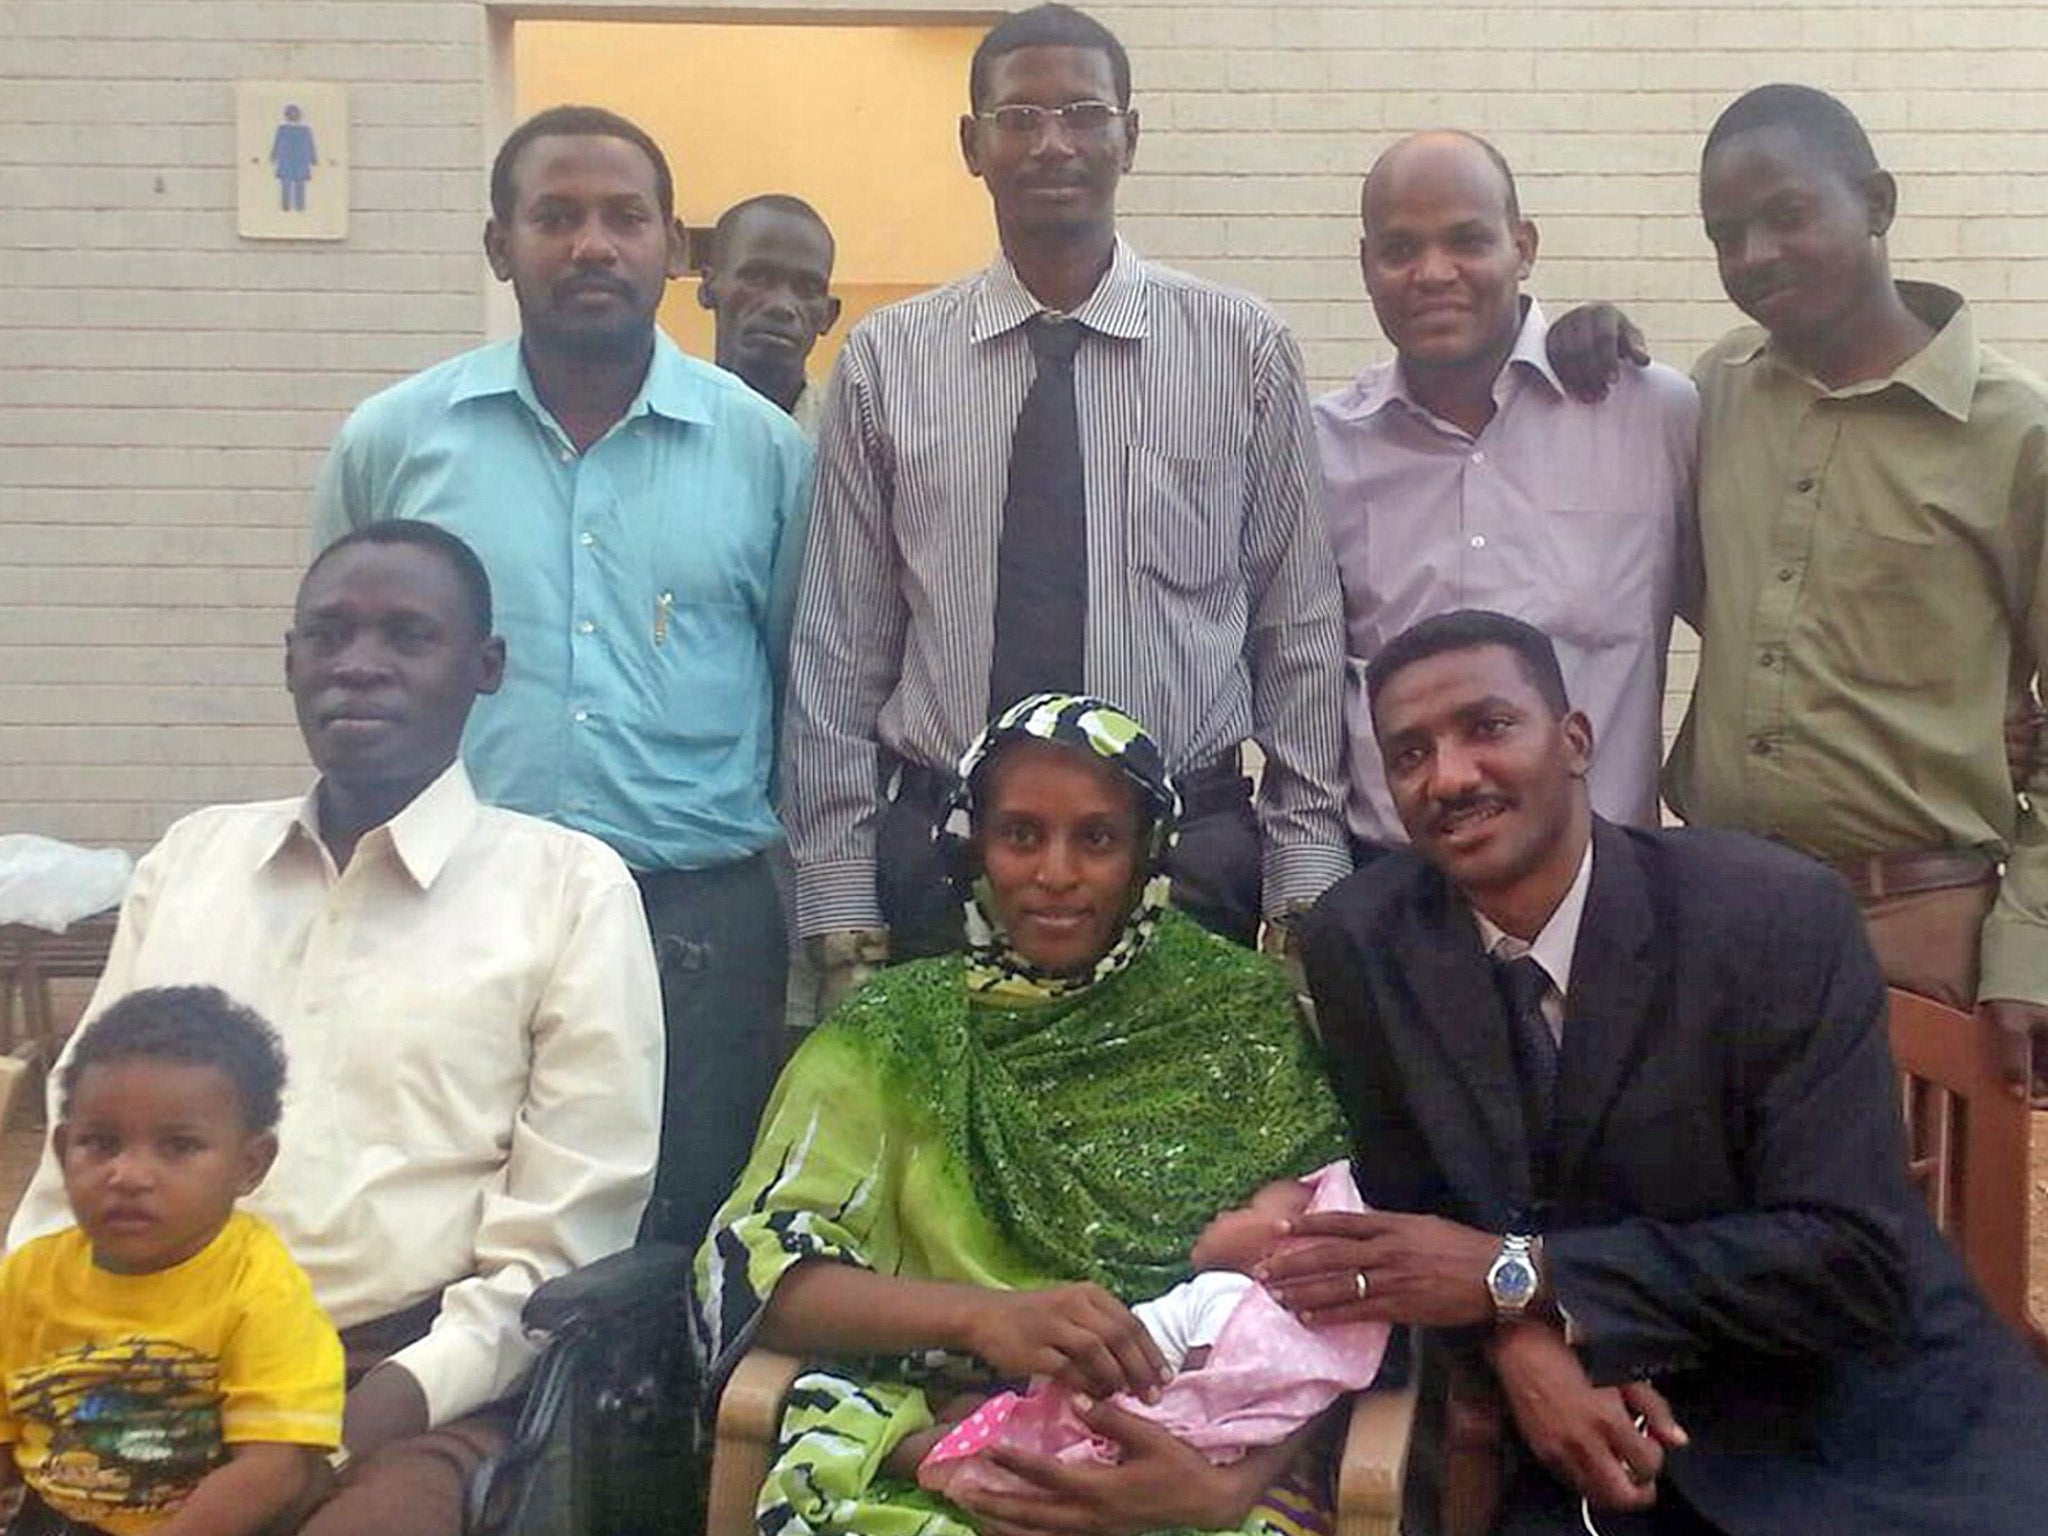 Meriam Ibrahim with her husband Daniel Wani (left), and two sons, after her release